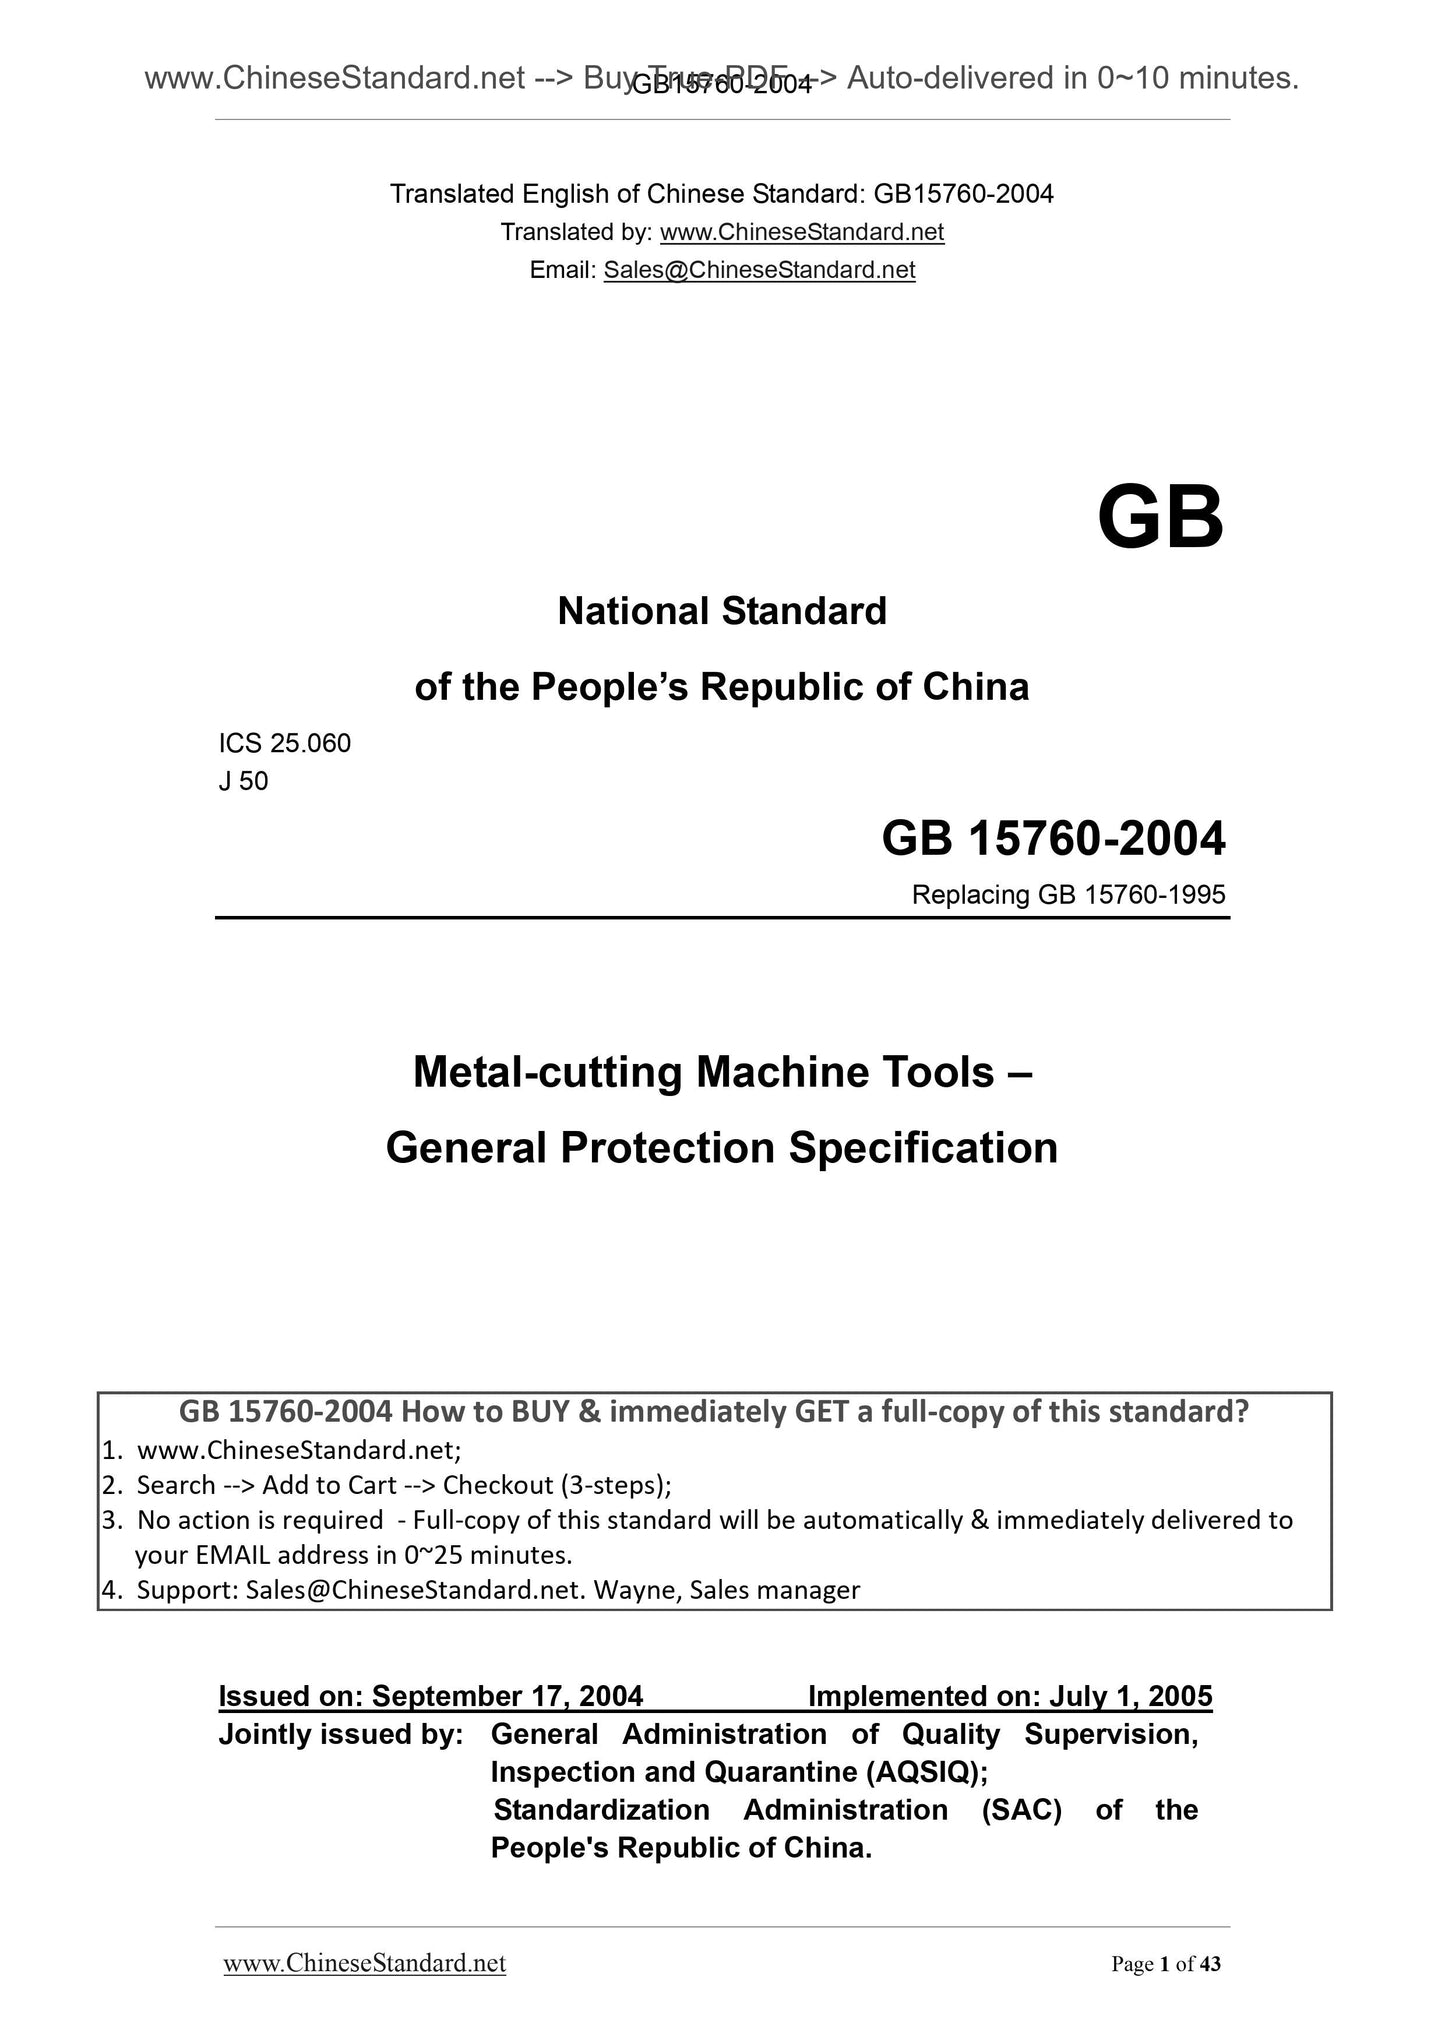 GB 15760-2004 Page 1